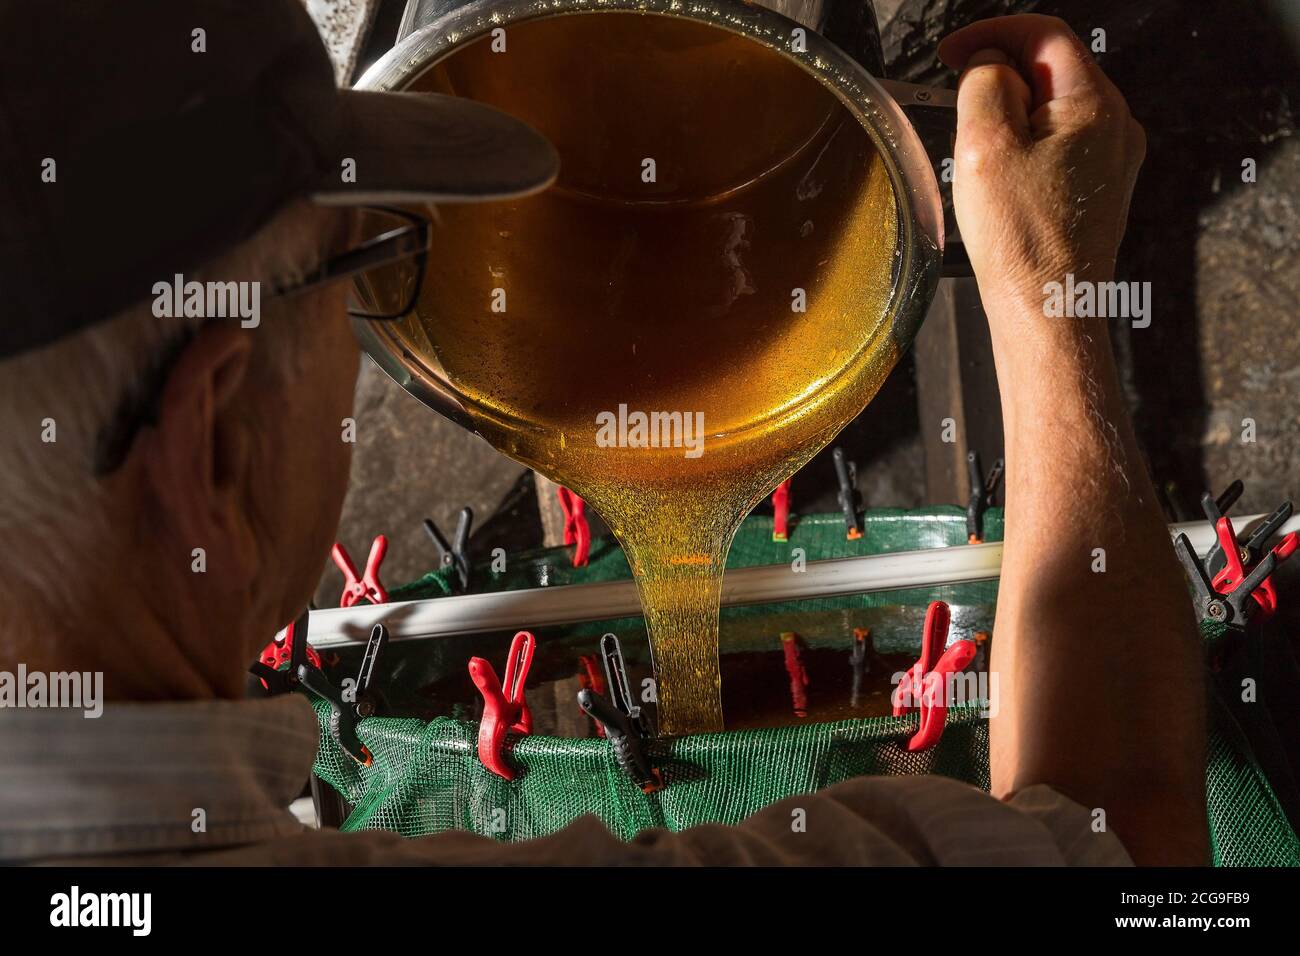 The beekeeper filters the remaining wax from the honey before packing it. Stock Photo